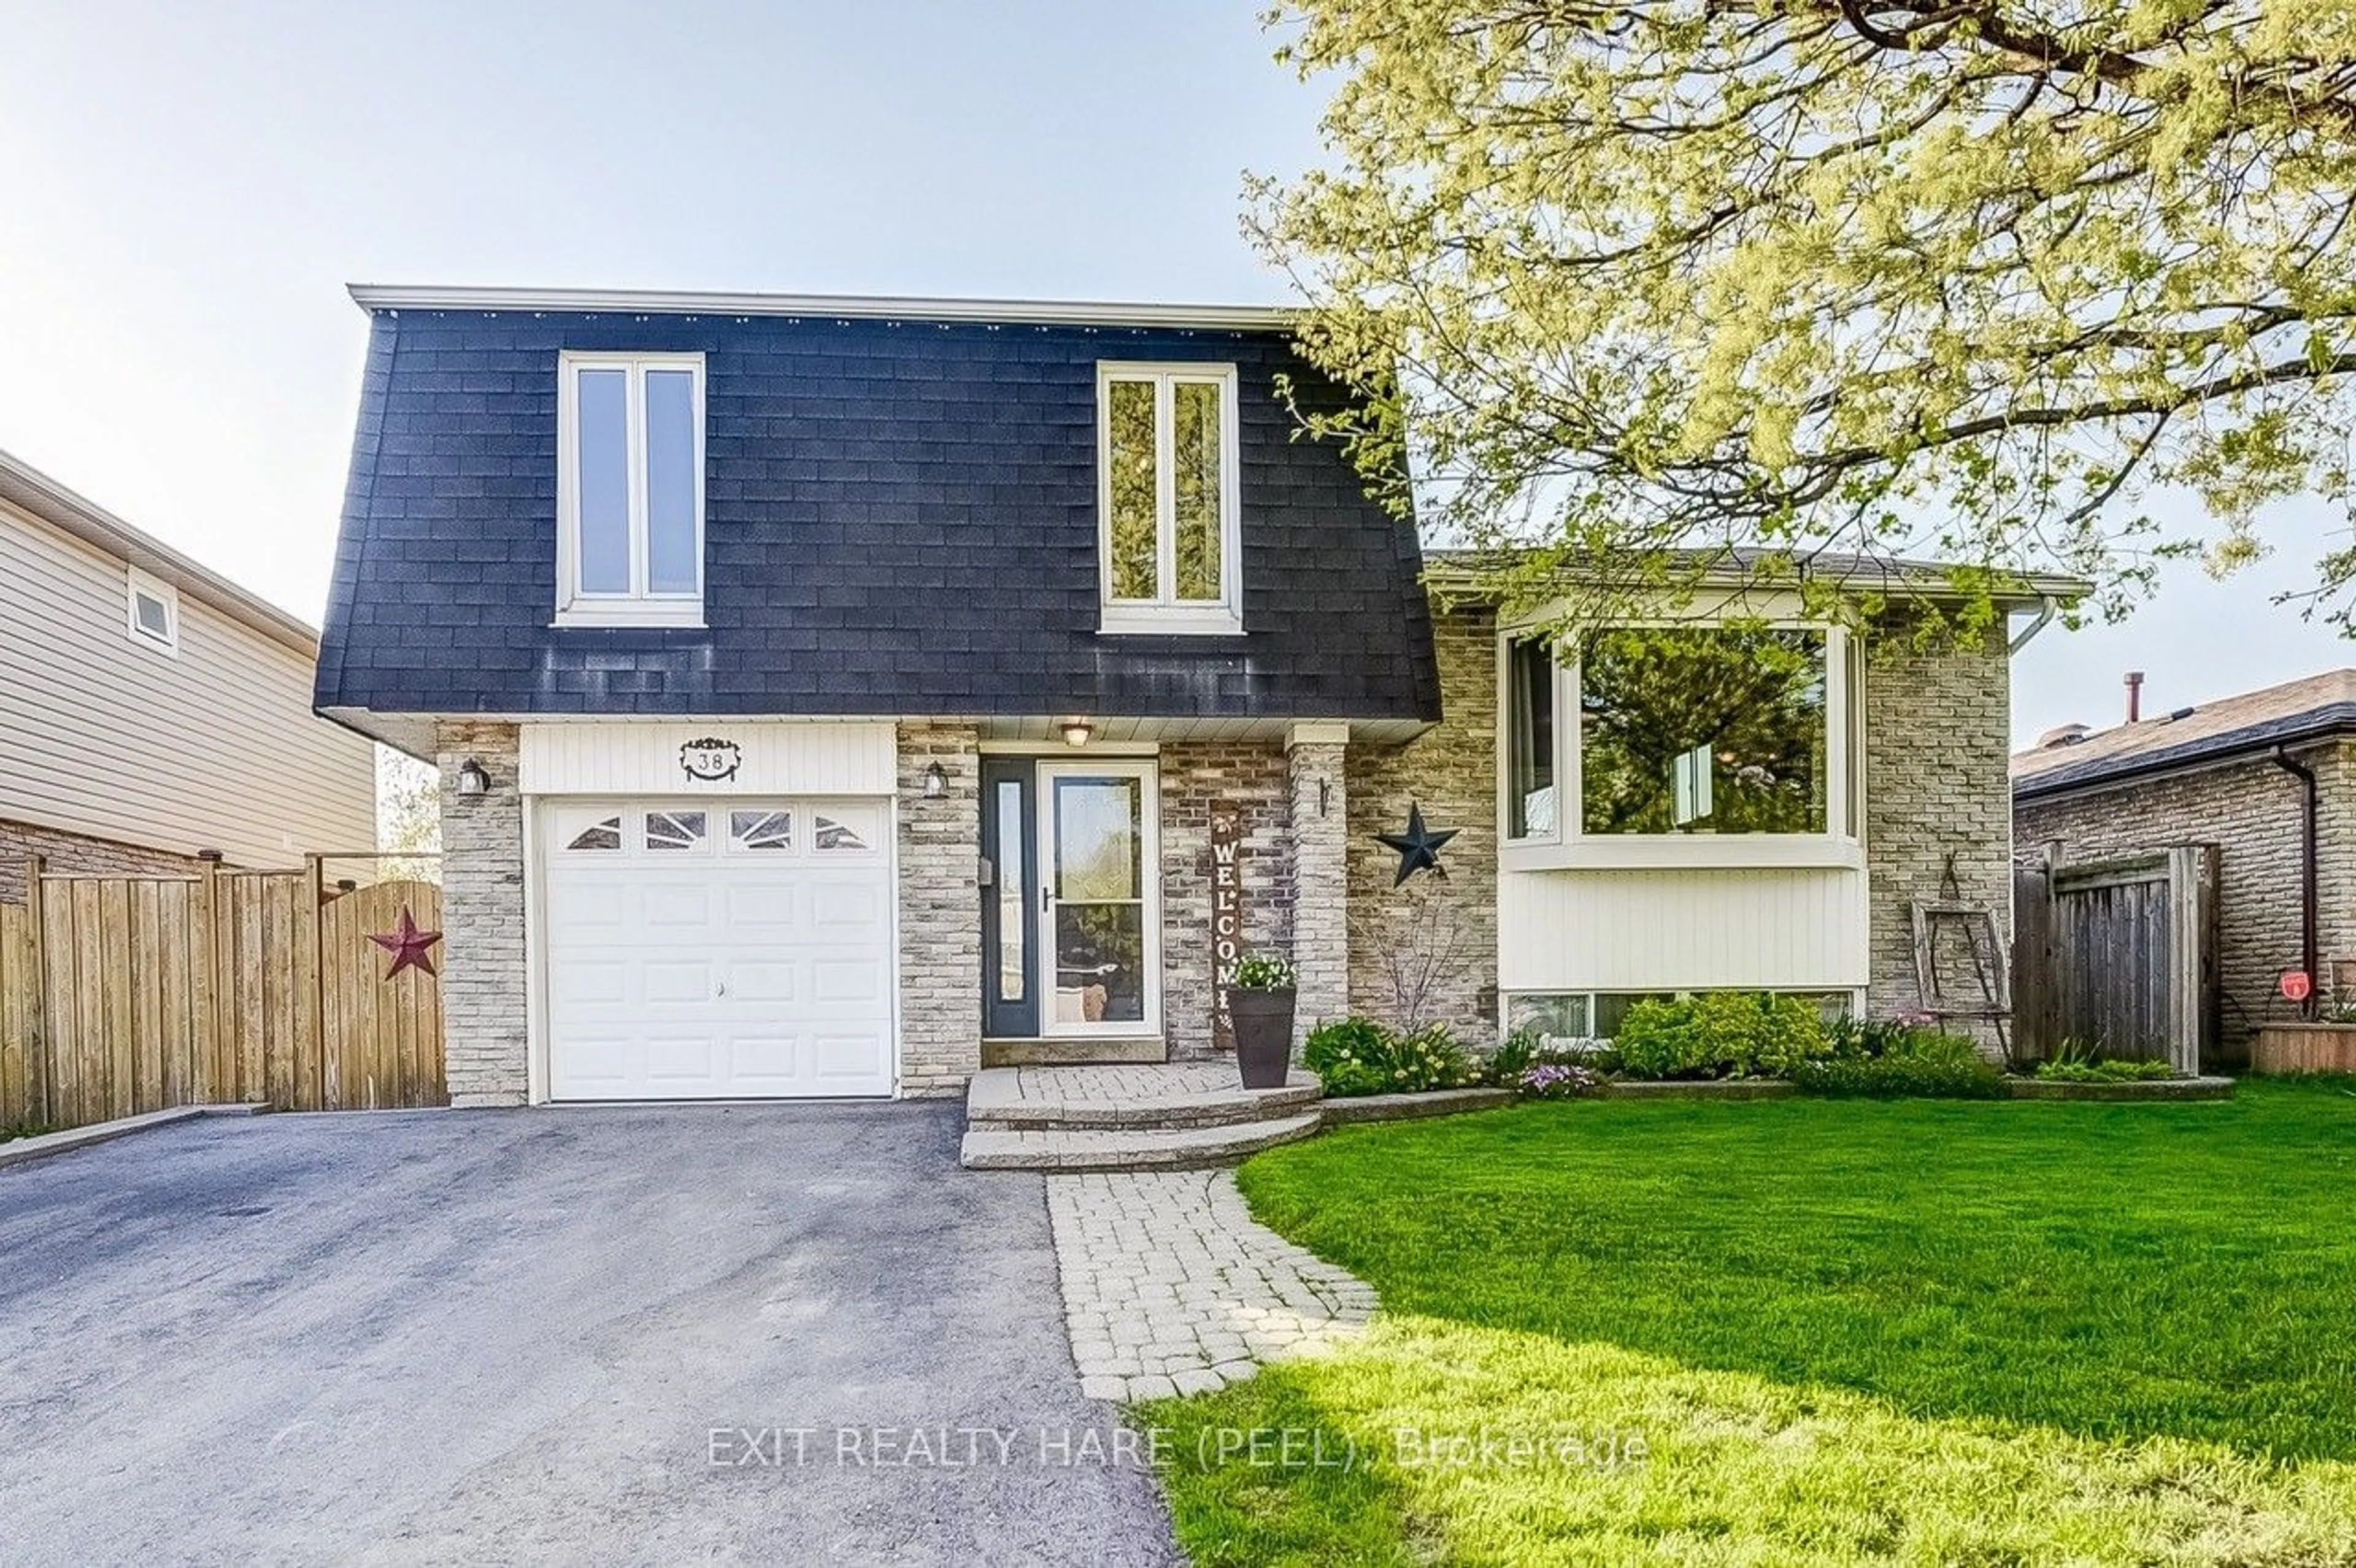 Home with brick exterior material for 38 Greenmount Rd, Brampton Ontario L6S 1L5